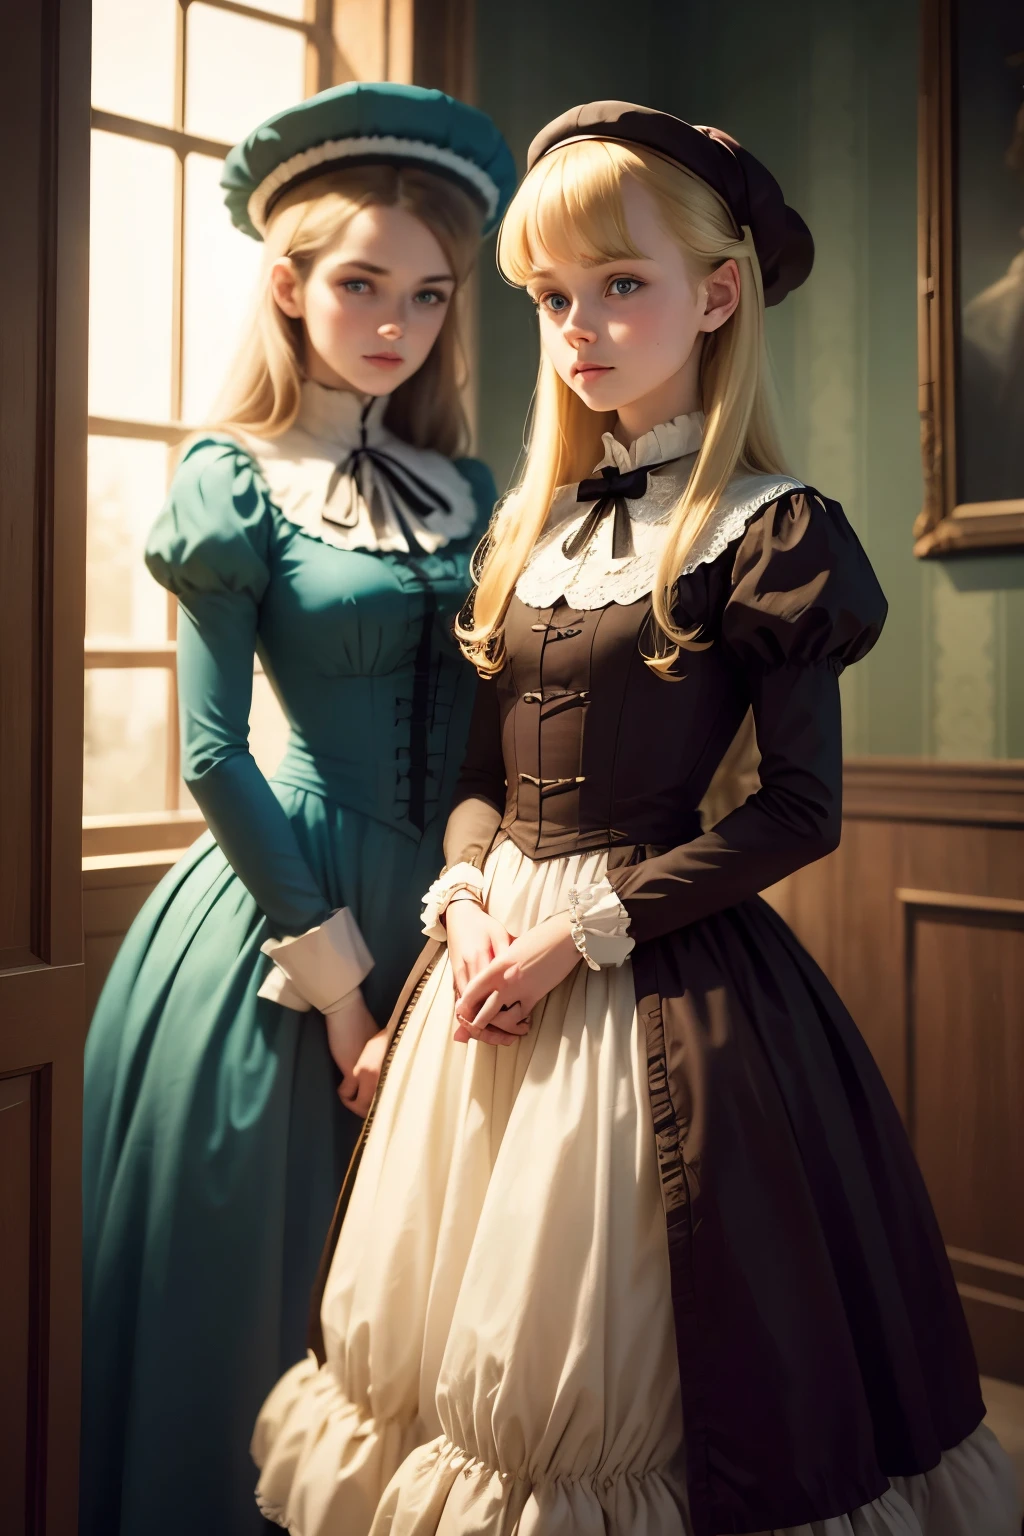 (Virginia Otis, 15 years old (blond hair, blue eyes)) pose with (16 years old Georgie Gerald (blond hair, green eyes)). Victorian style. thin, cute face, walks at night in Canterville Castle (inspired by the novel The Canterville Ghost). aged 1887, Victorian dark fantasy